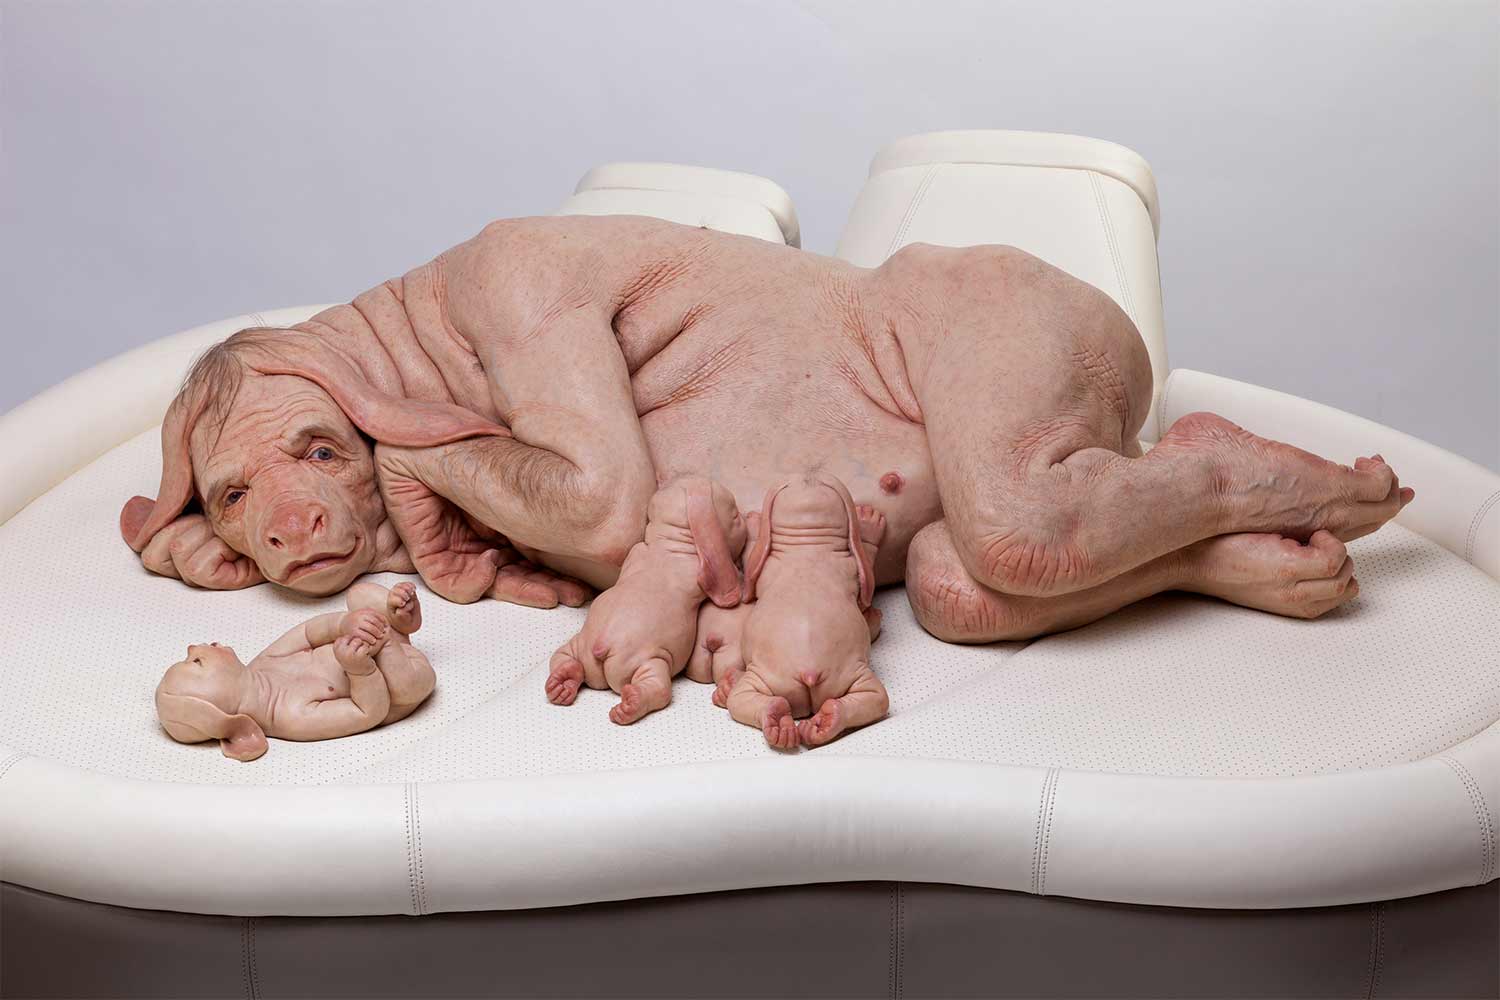 Patricia Piccinini, The Young Family, 2002, Photo: Graham Baring, Courtesy of the artist